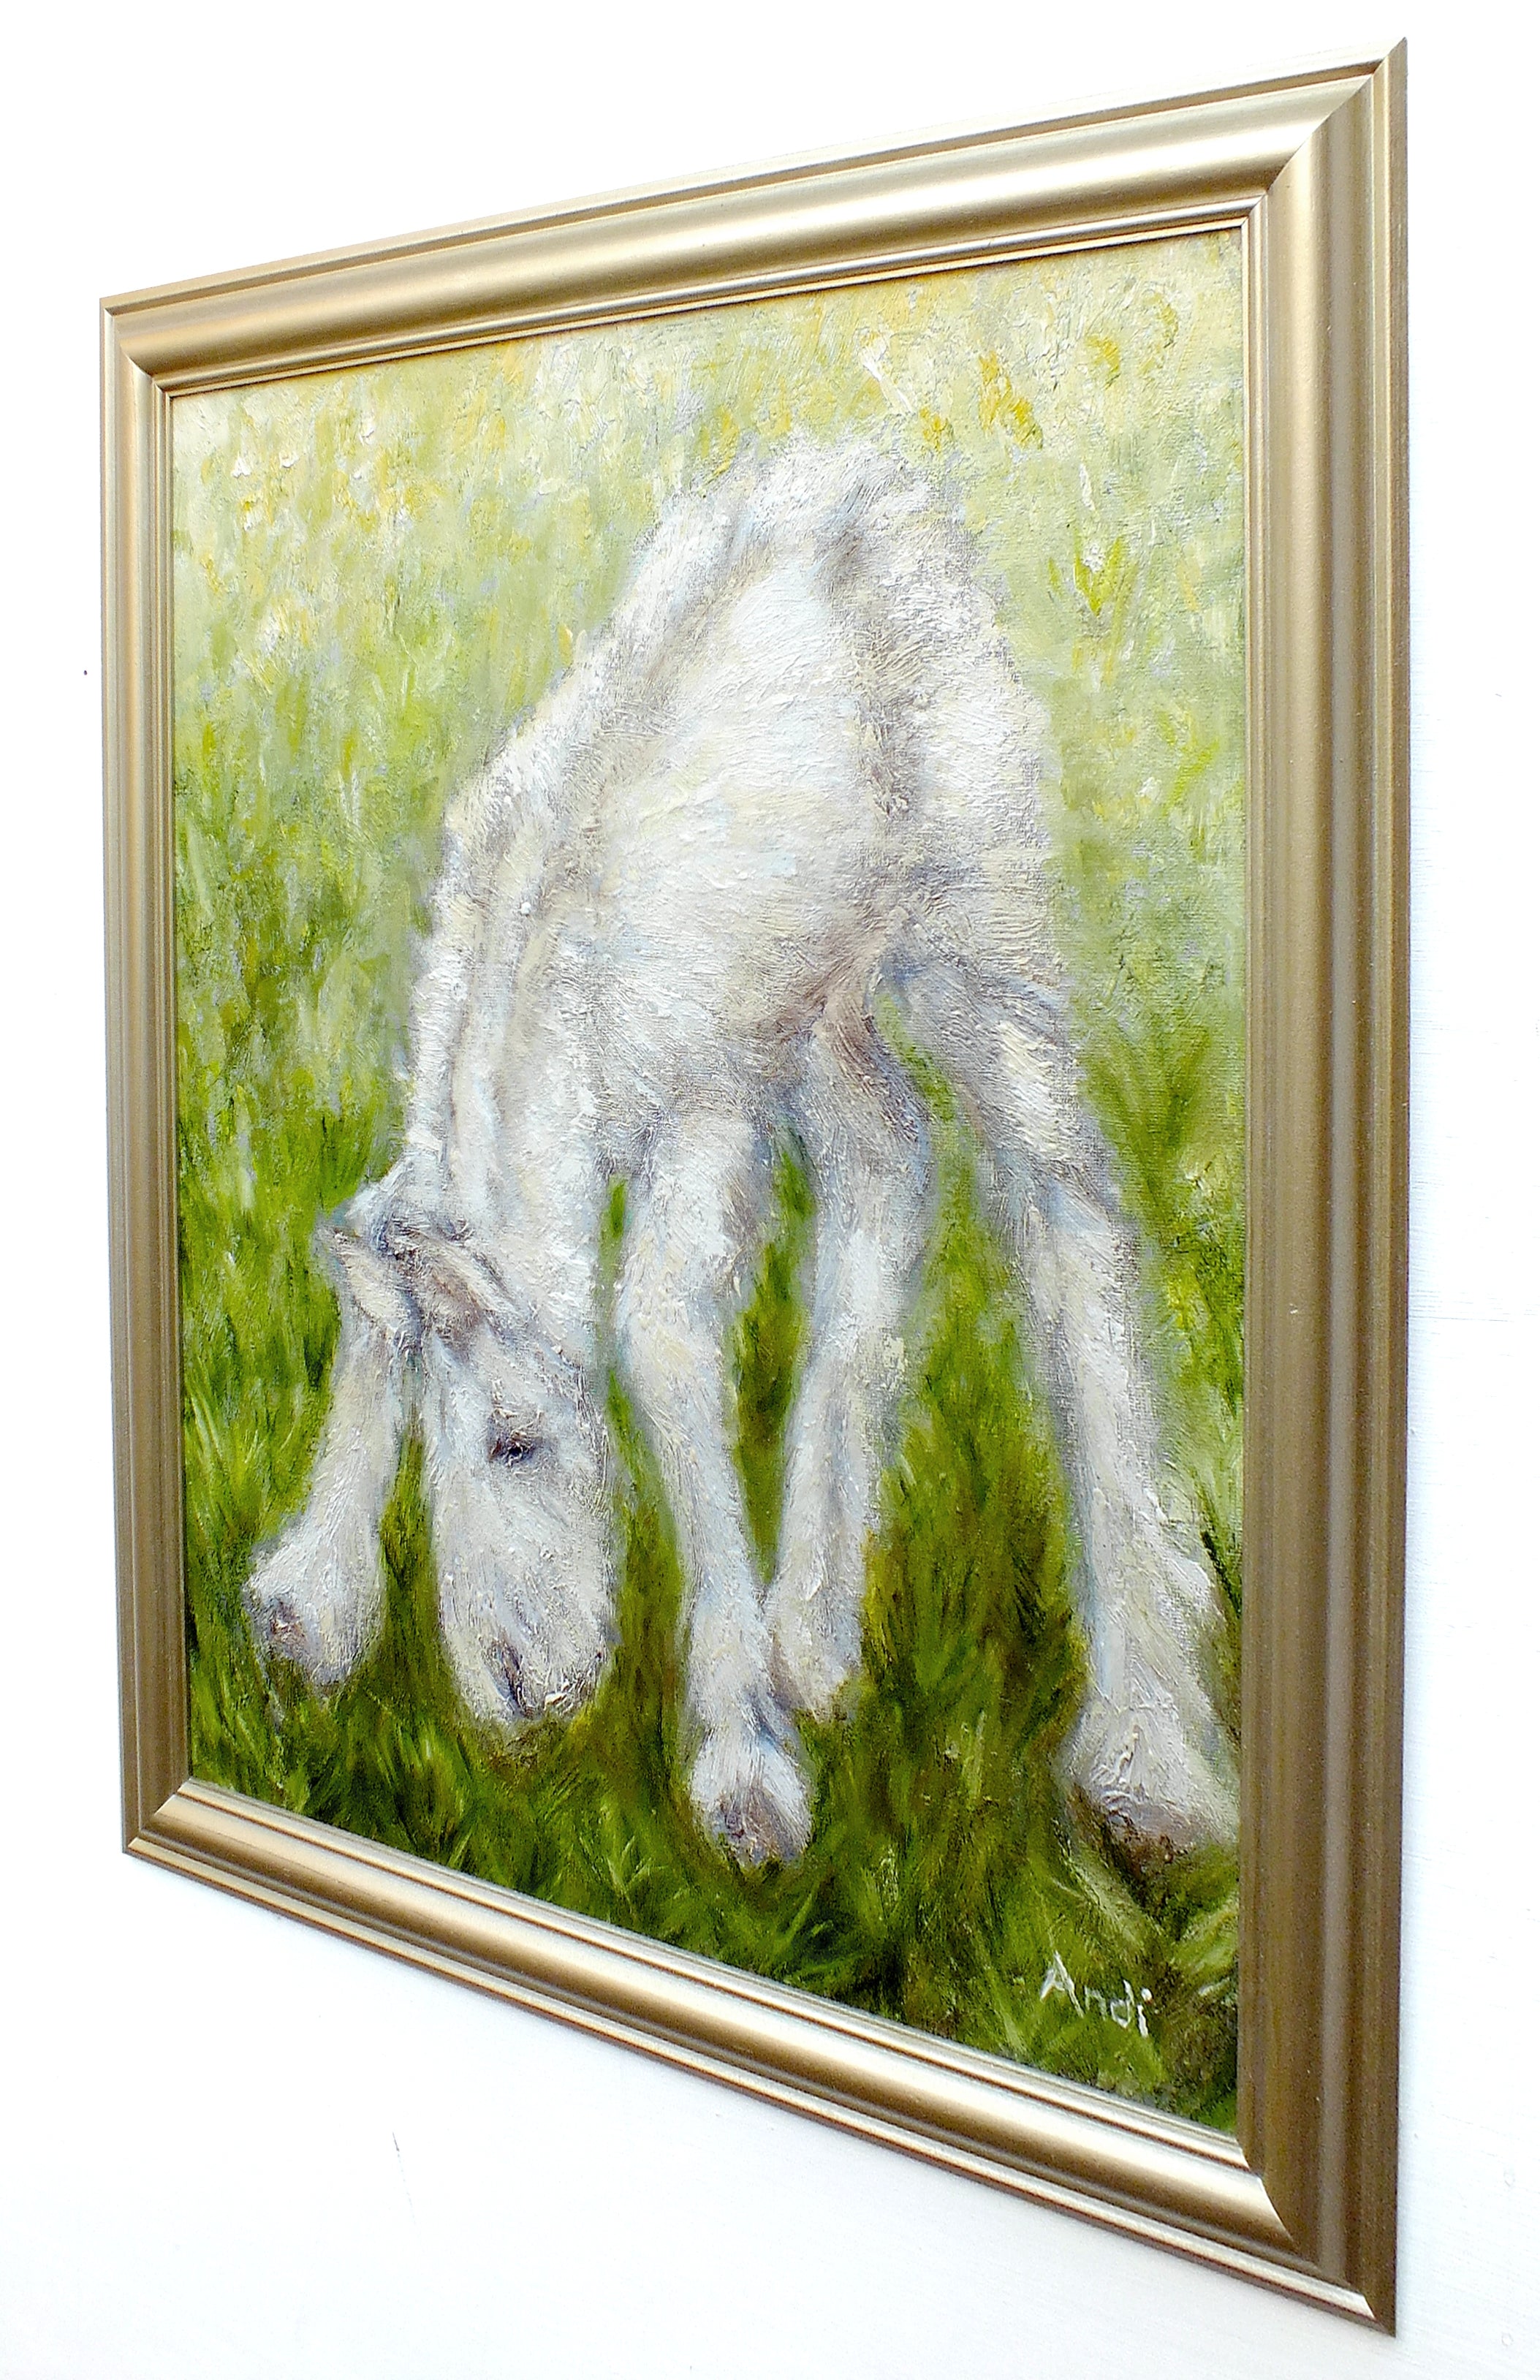 Horse Painting Equestrian Decor Original Oil Painting Foal Grazing